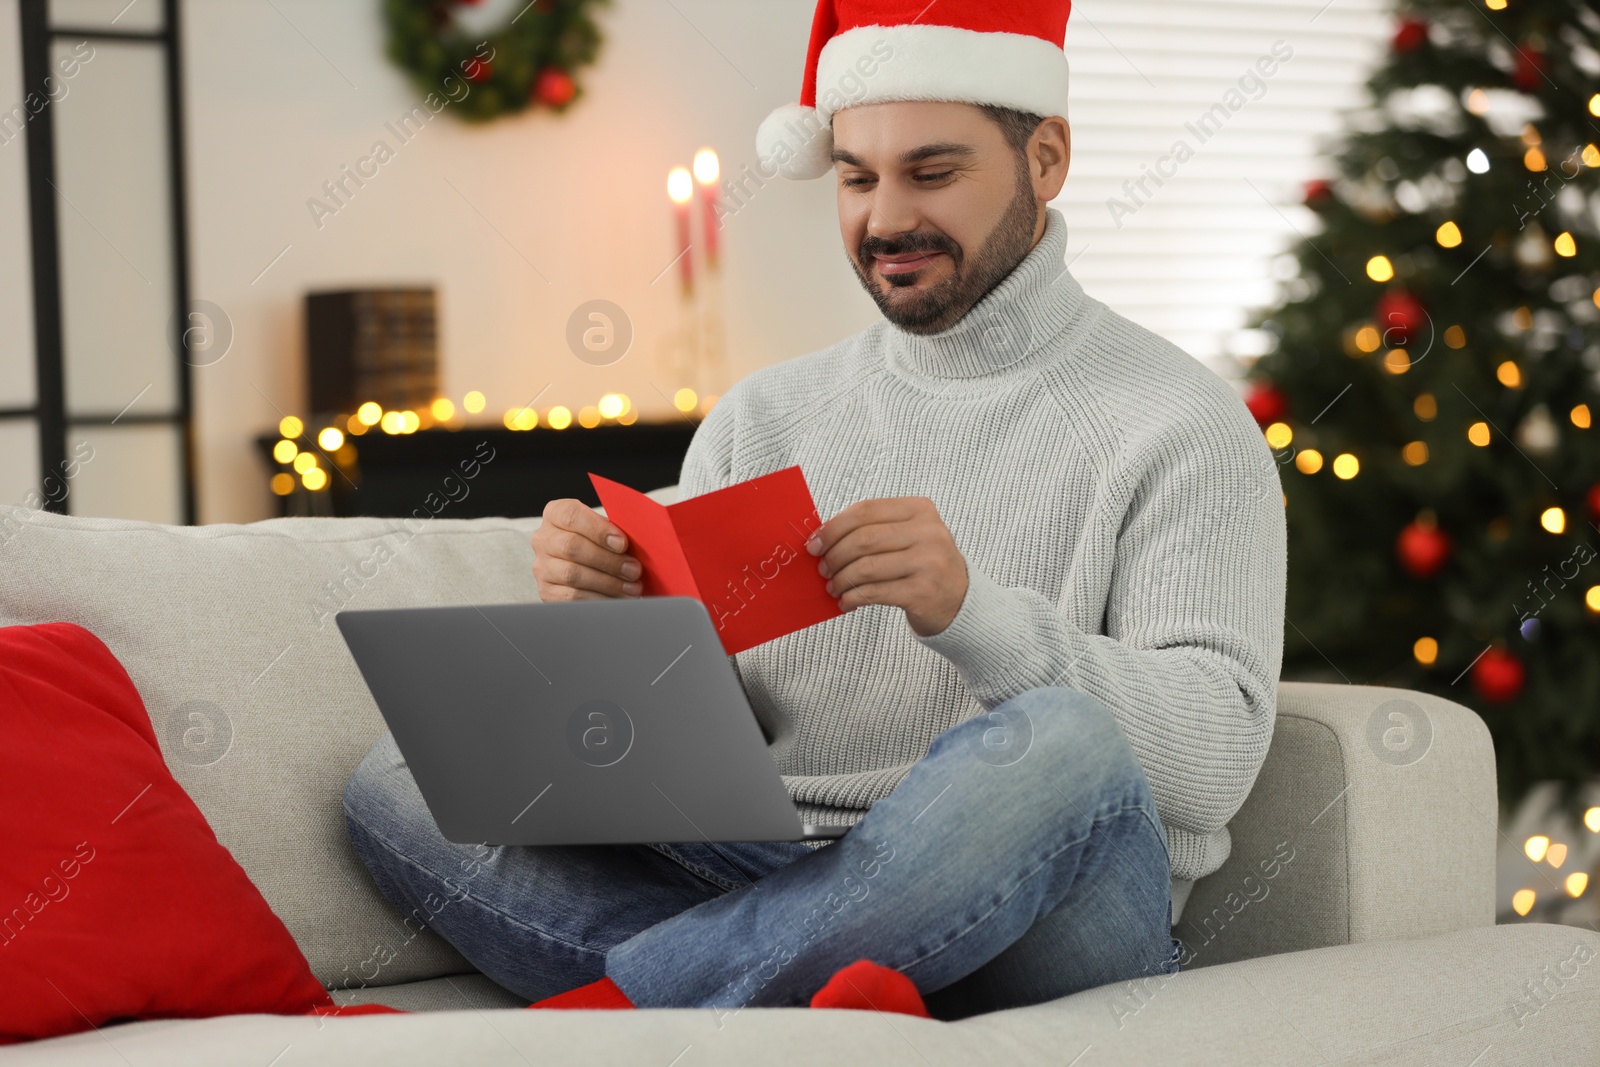 Photo of Celebrating Christmas online with exchanged by mail presents. Man in Santa hat reading greeting card during video call on laptop at home